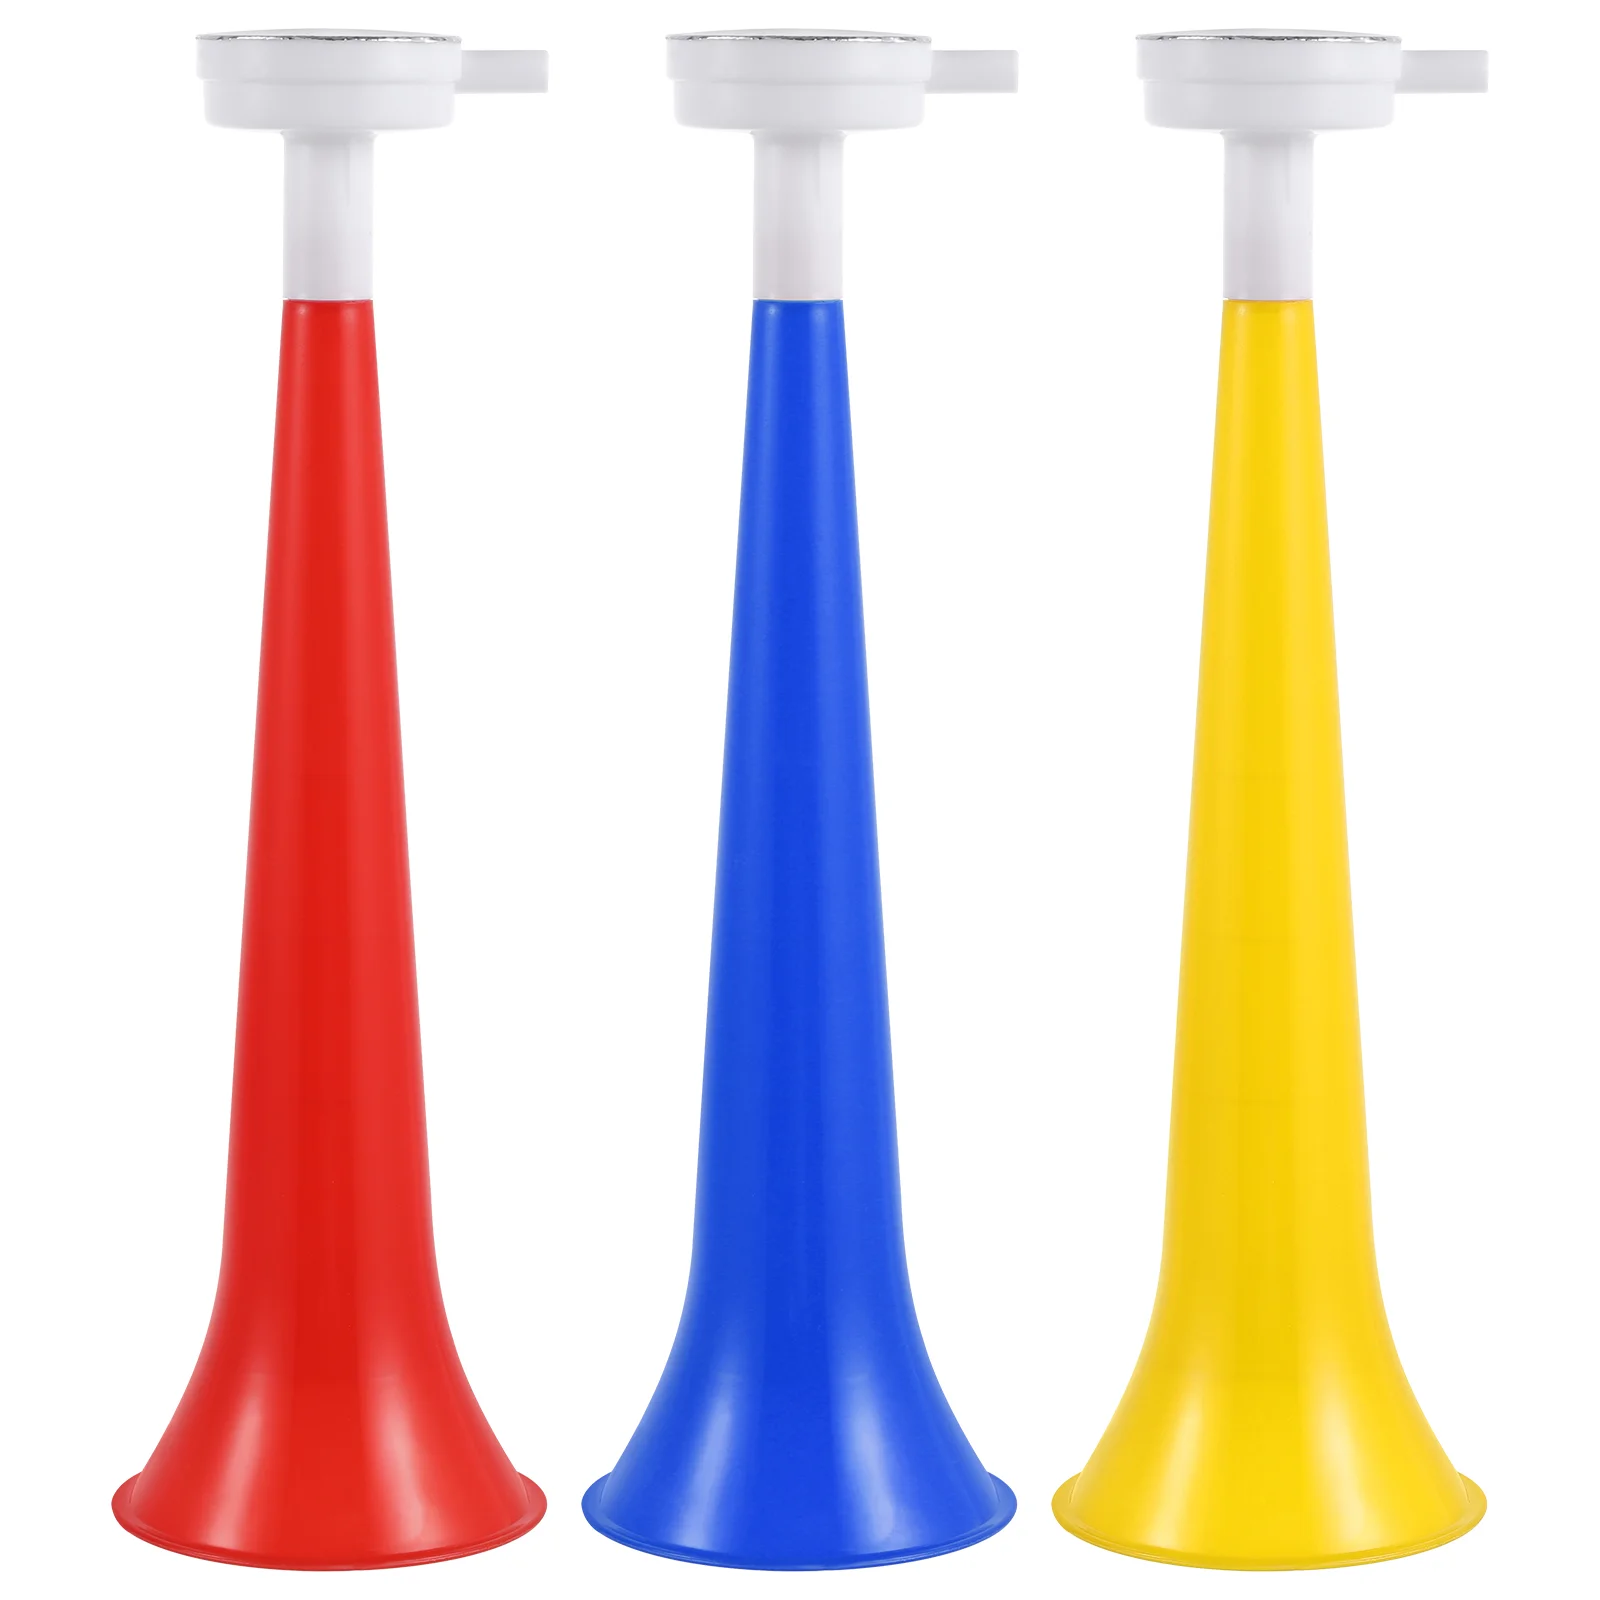 

10 Pcs 1 Section Plastic Trumpet Noise Maker Kids Toys Cheerleader Sports Game Cheering Props Birthday Party Favor Gift (Random